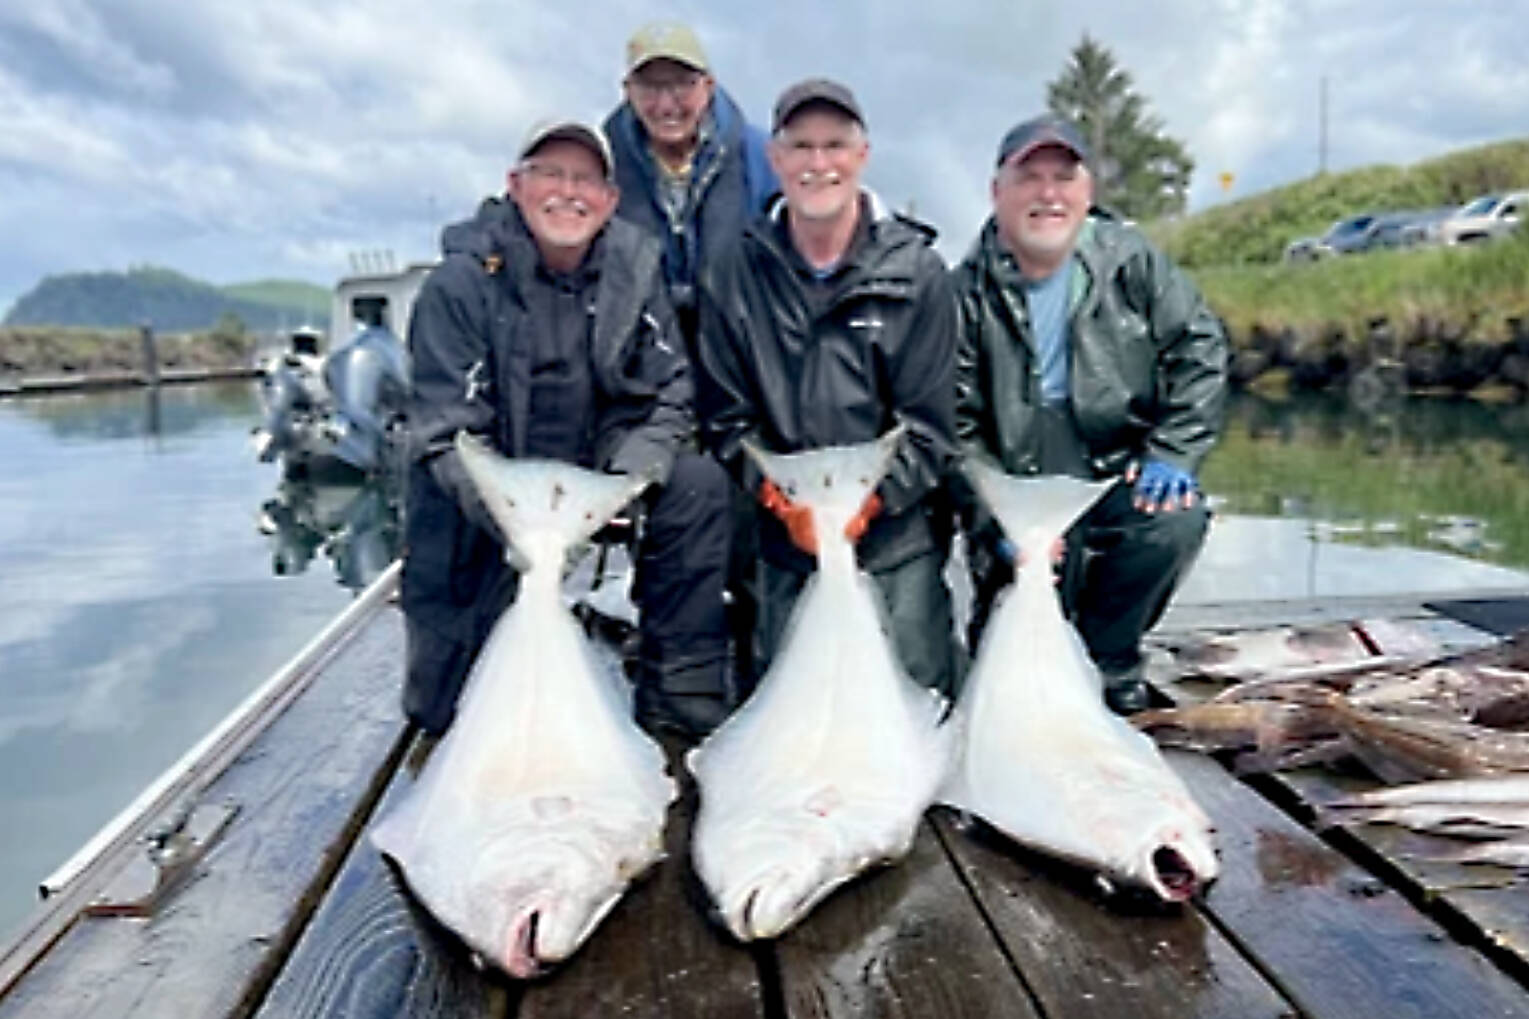 Dave Bergeron/WDFW
The late-season halibut fishery opens on the outer coast and the Strait of Juan de Fuca on August 16.